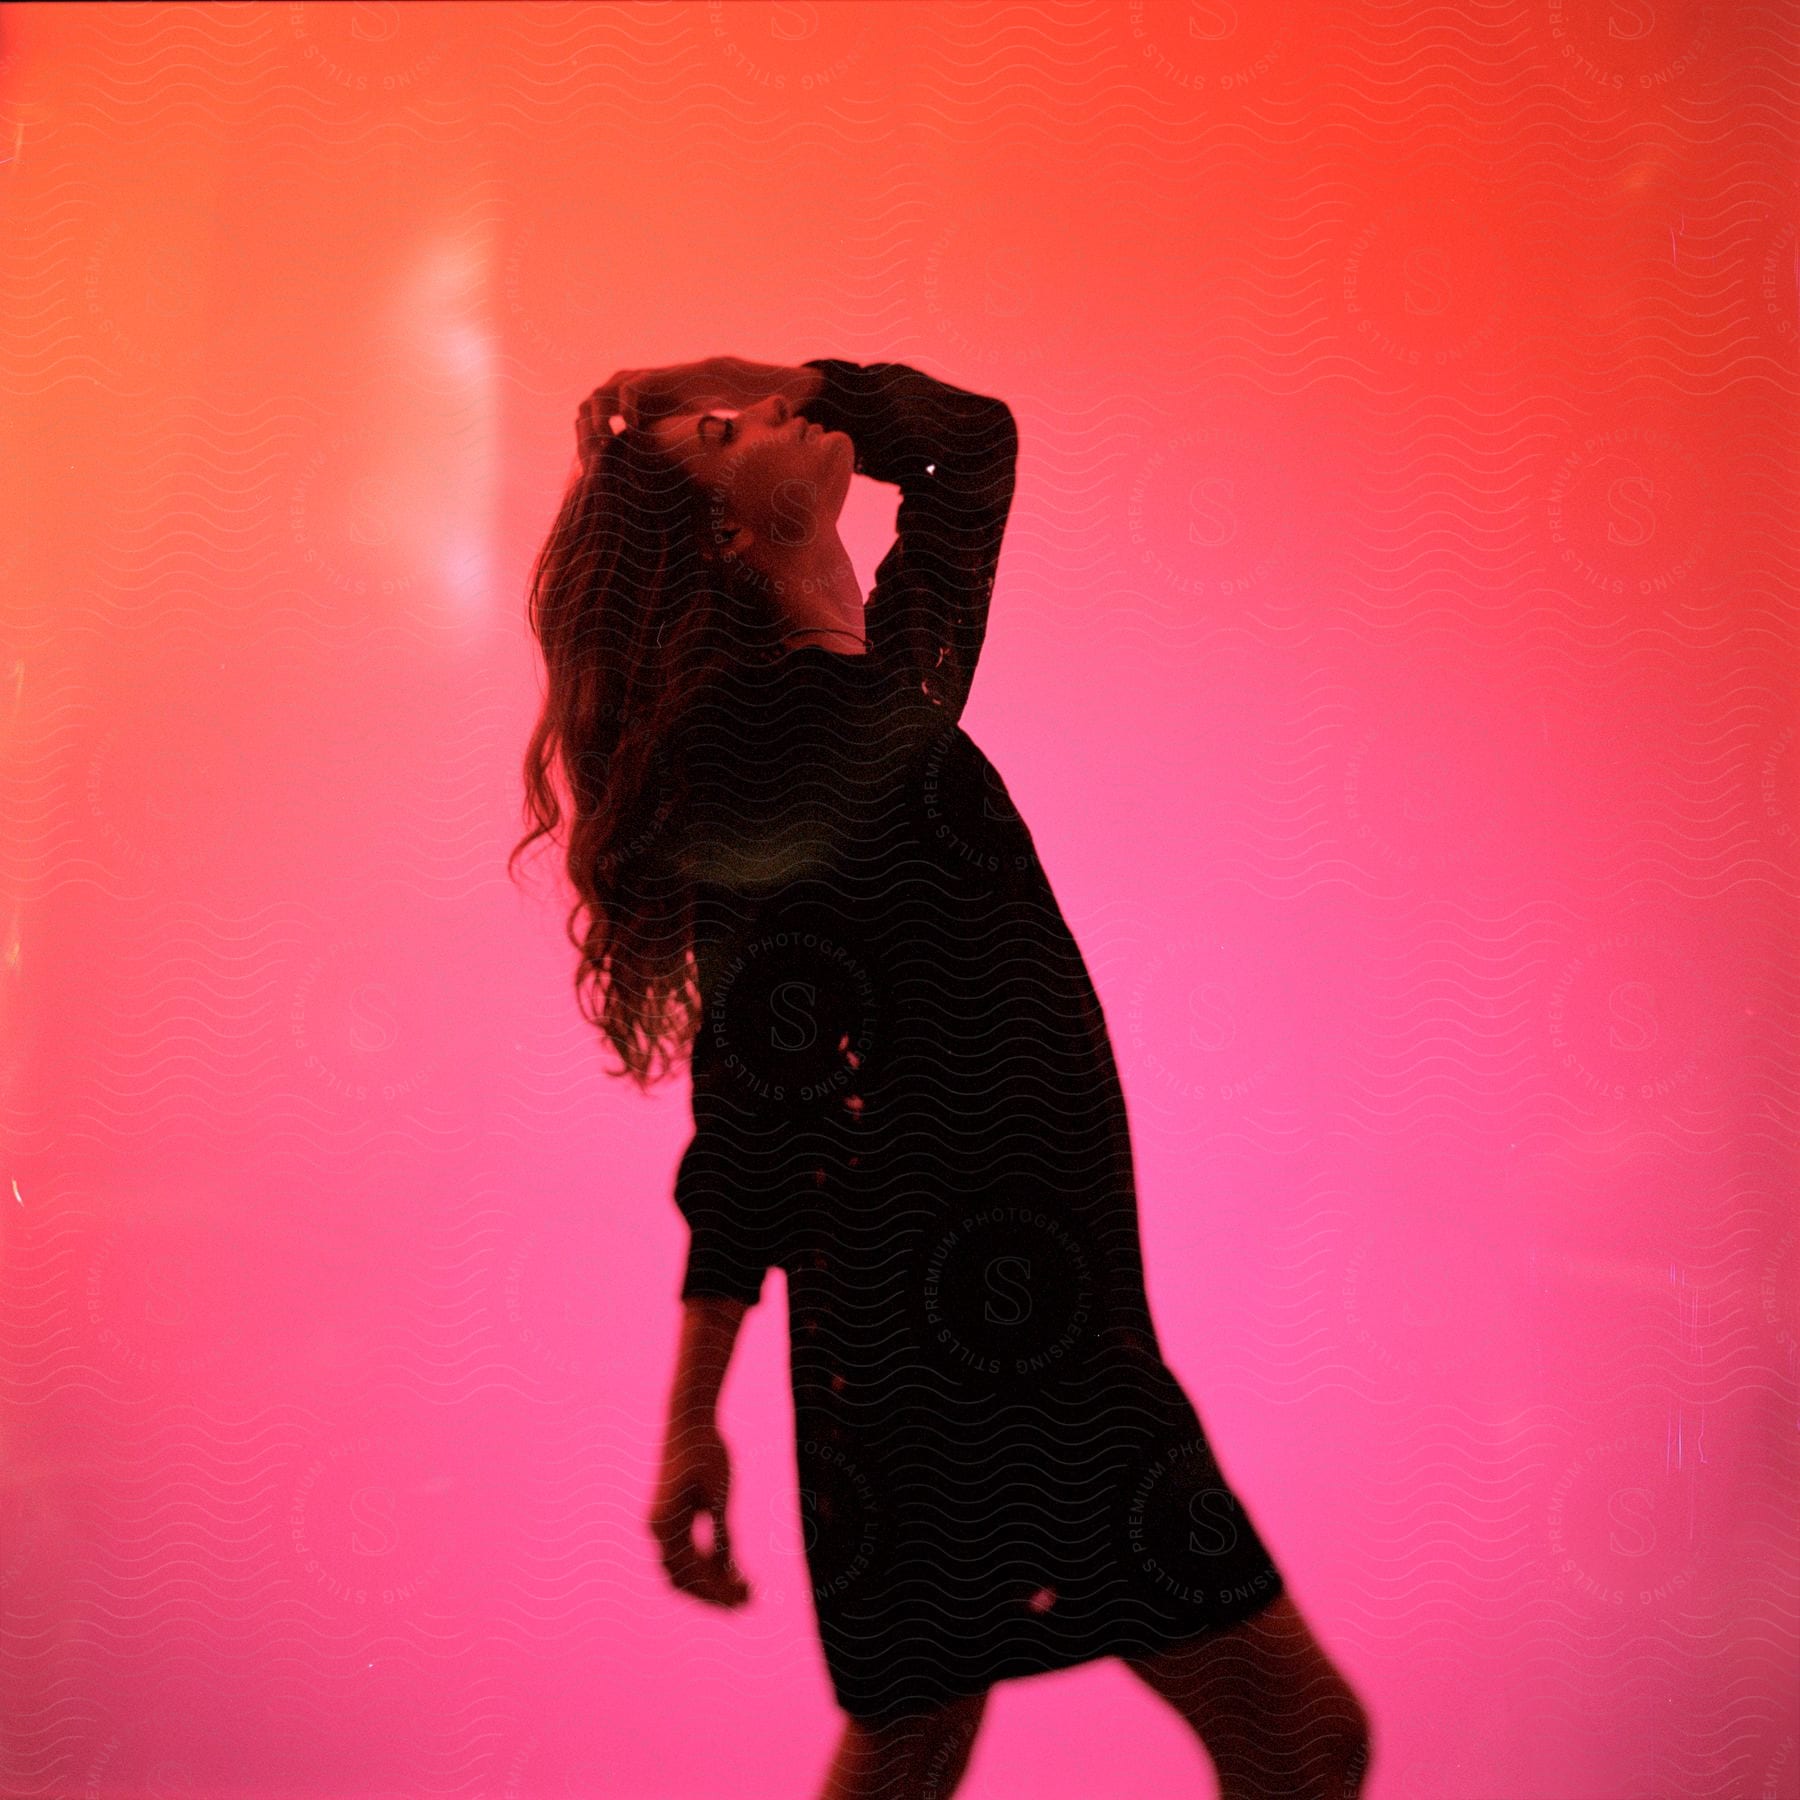 Young woman with one hand in her hair wearing a black dress against a pink background.